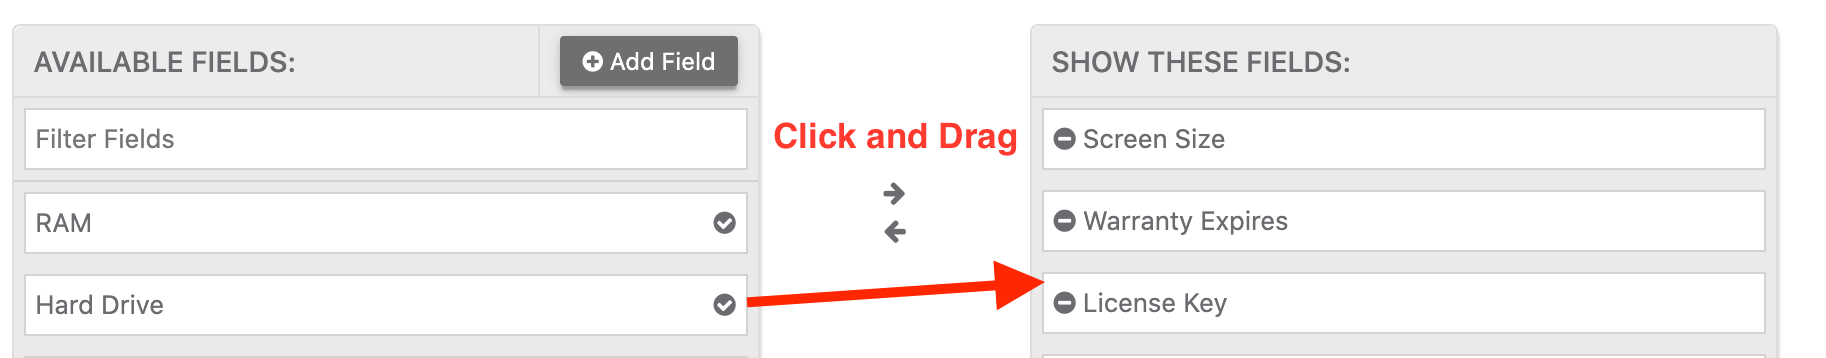 Click and Drag Field